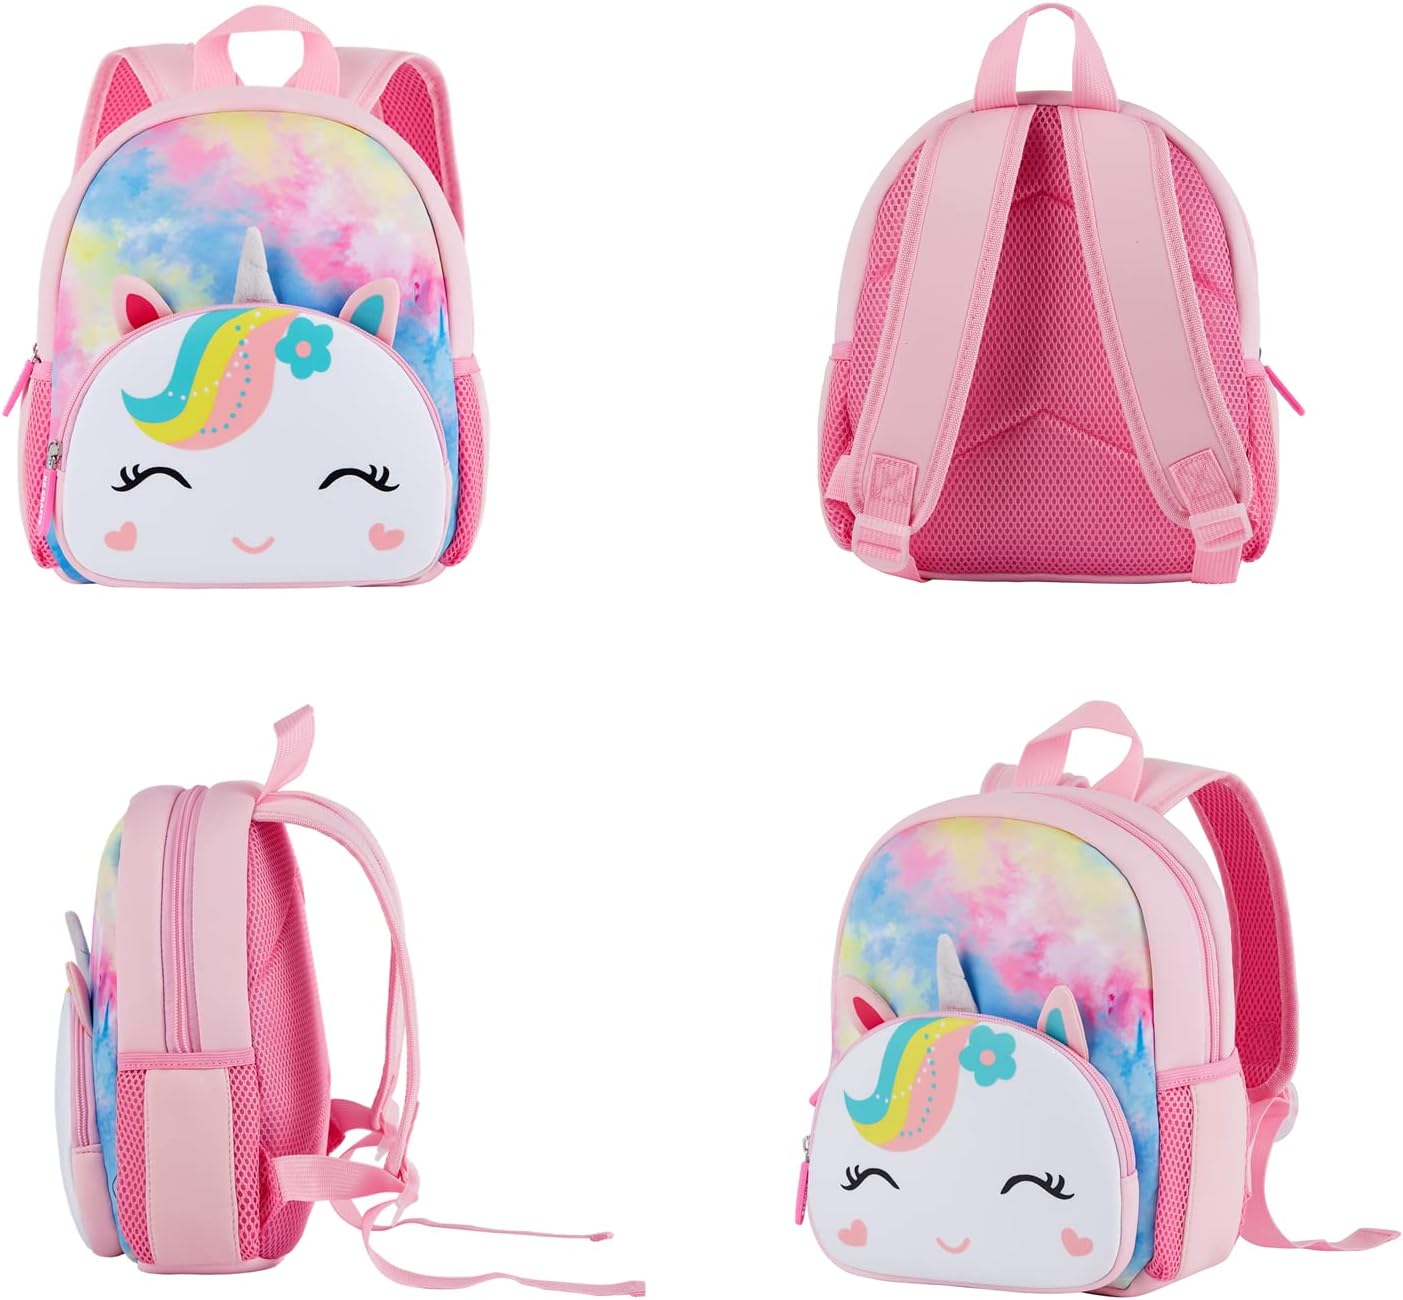 Toddler’s Soft Plush Backpack for Pre School - Picnic